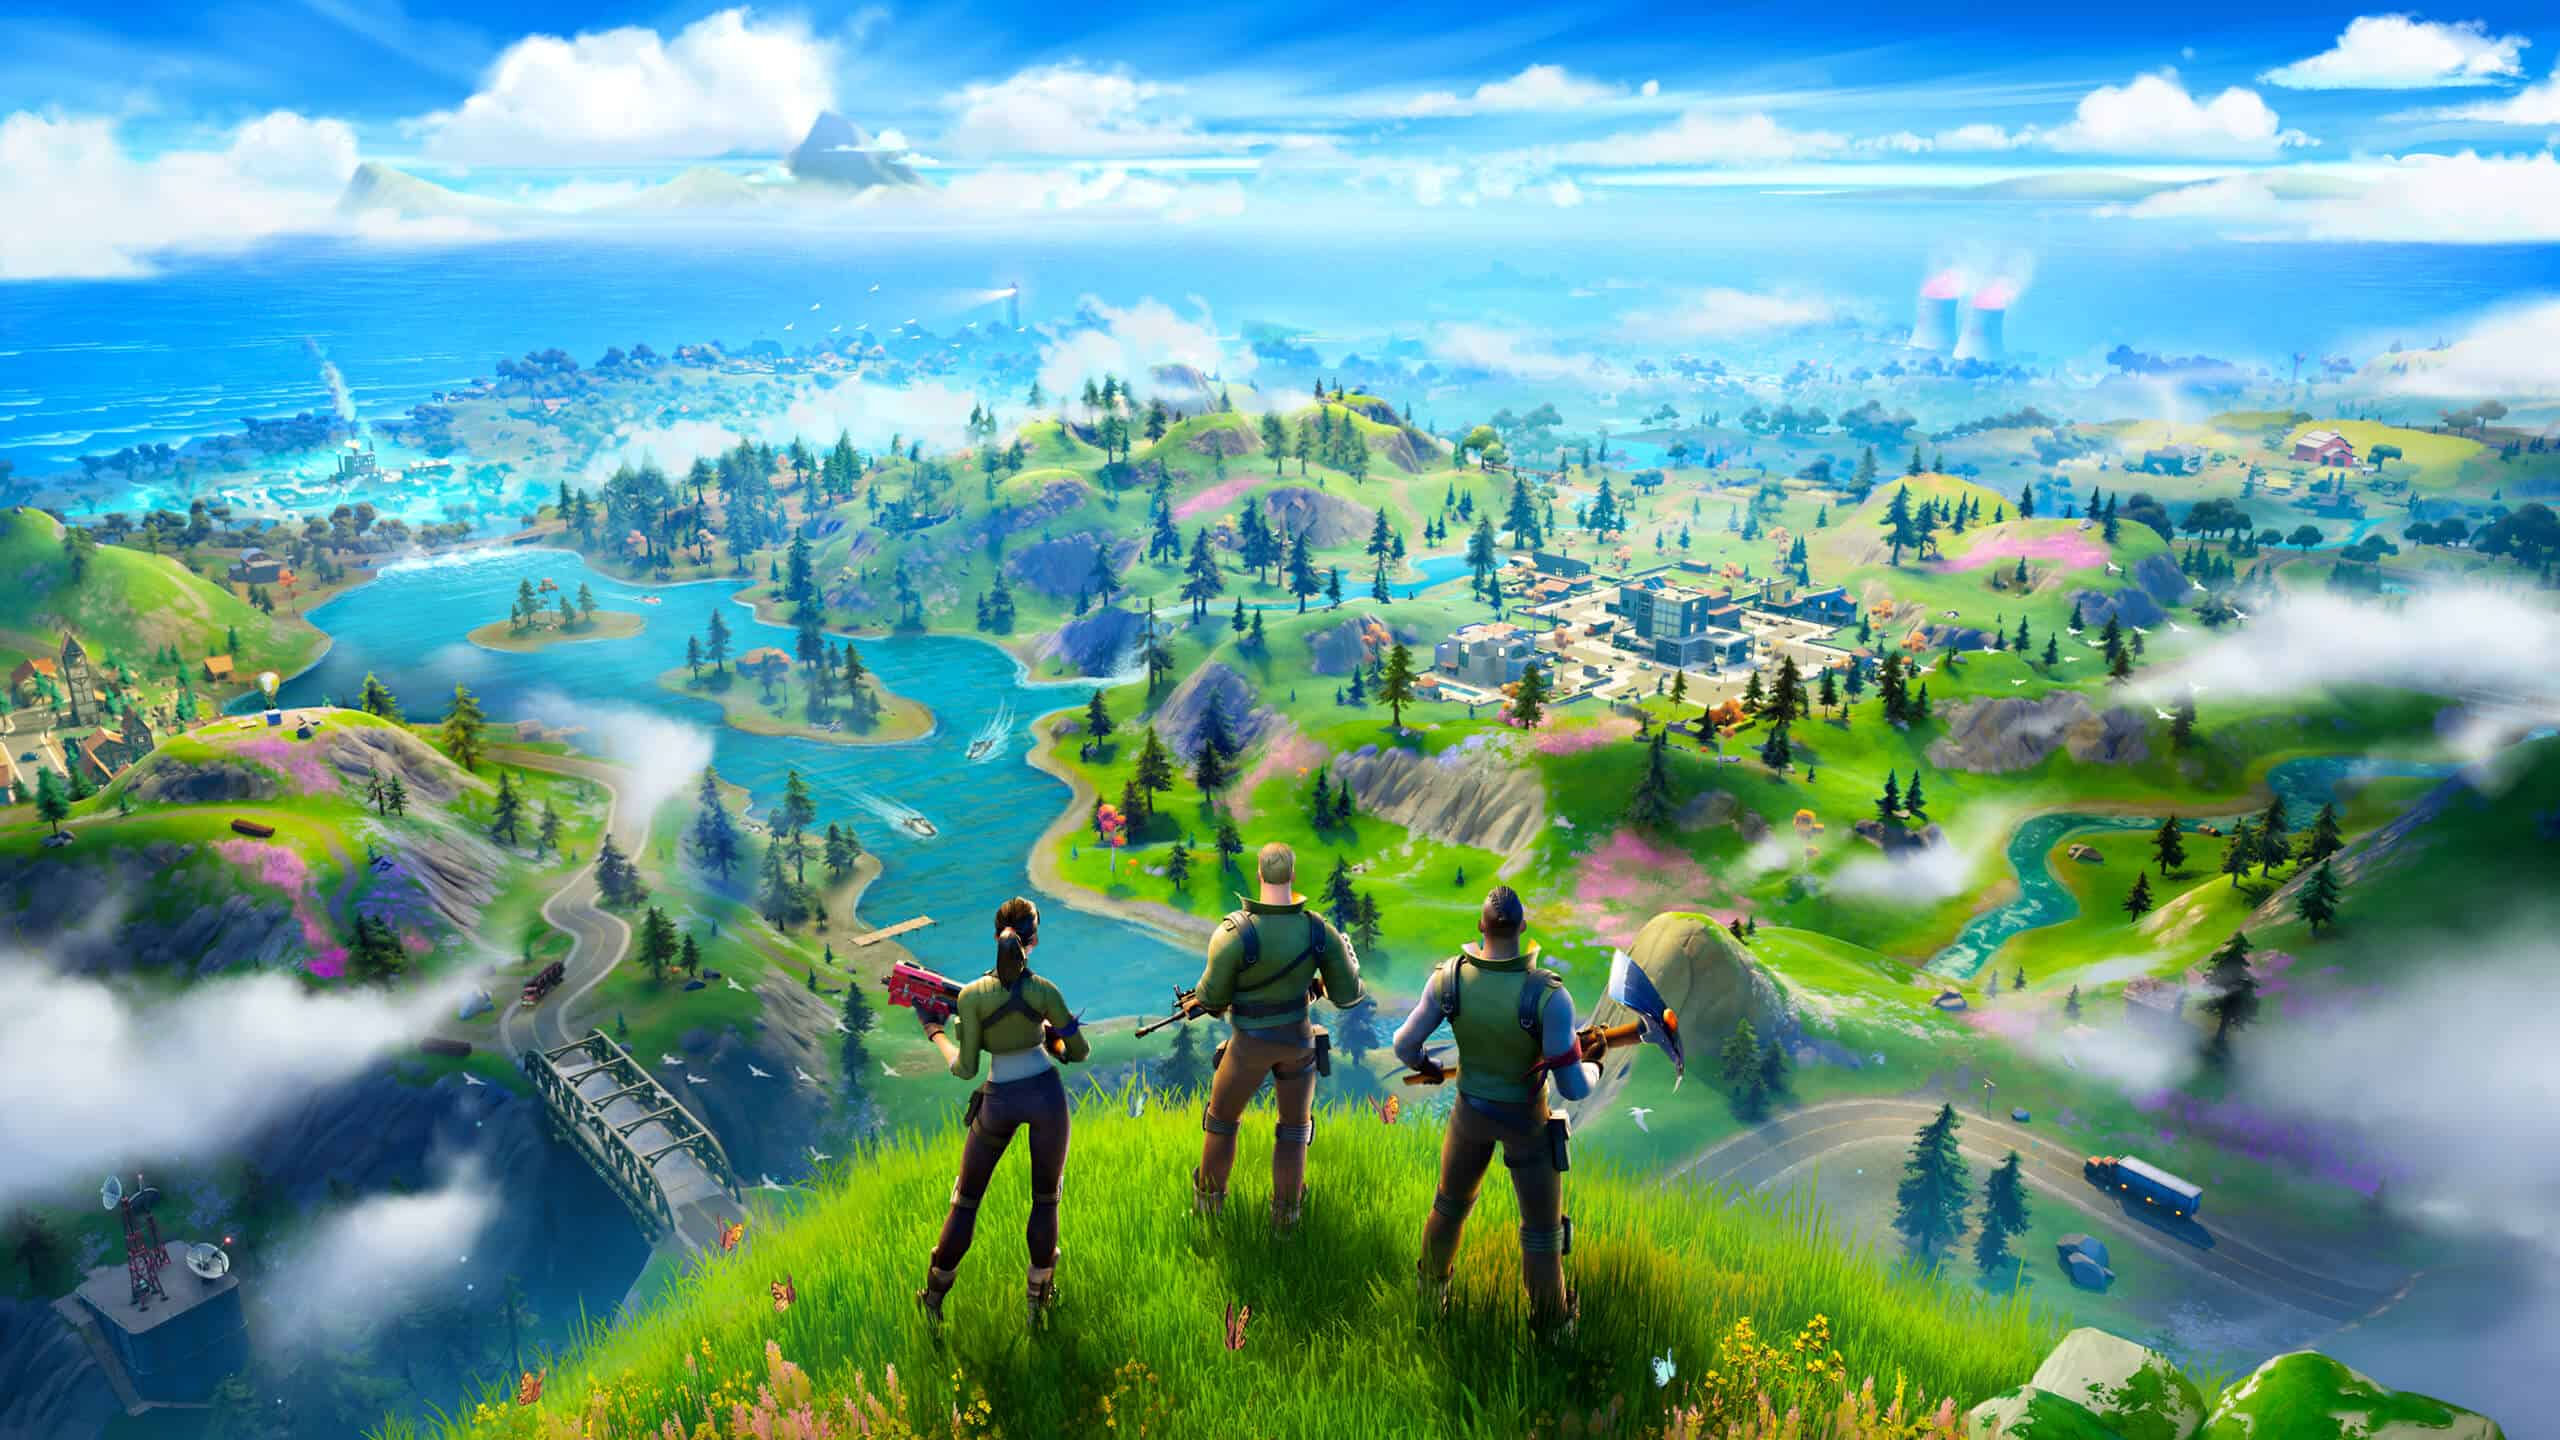 Three characters overlooking a vibrant, lush video game landscape with rivers, fields, and distant towns under a clear blue sky.